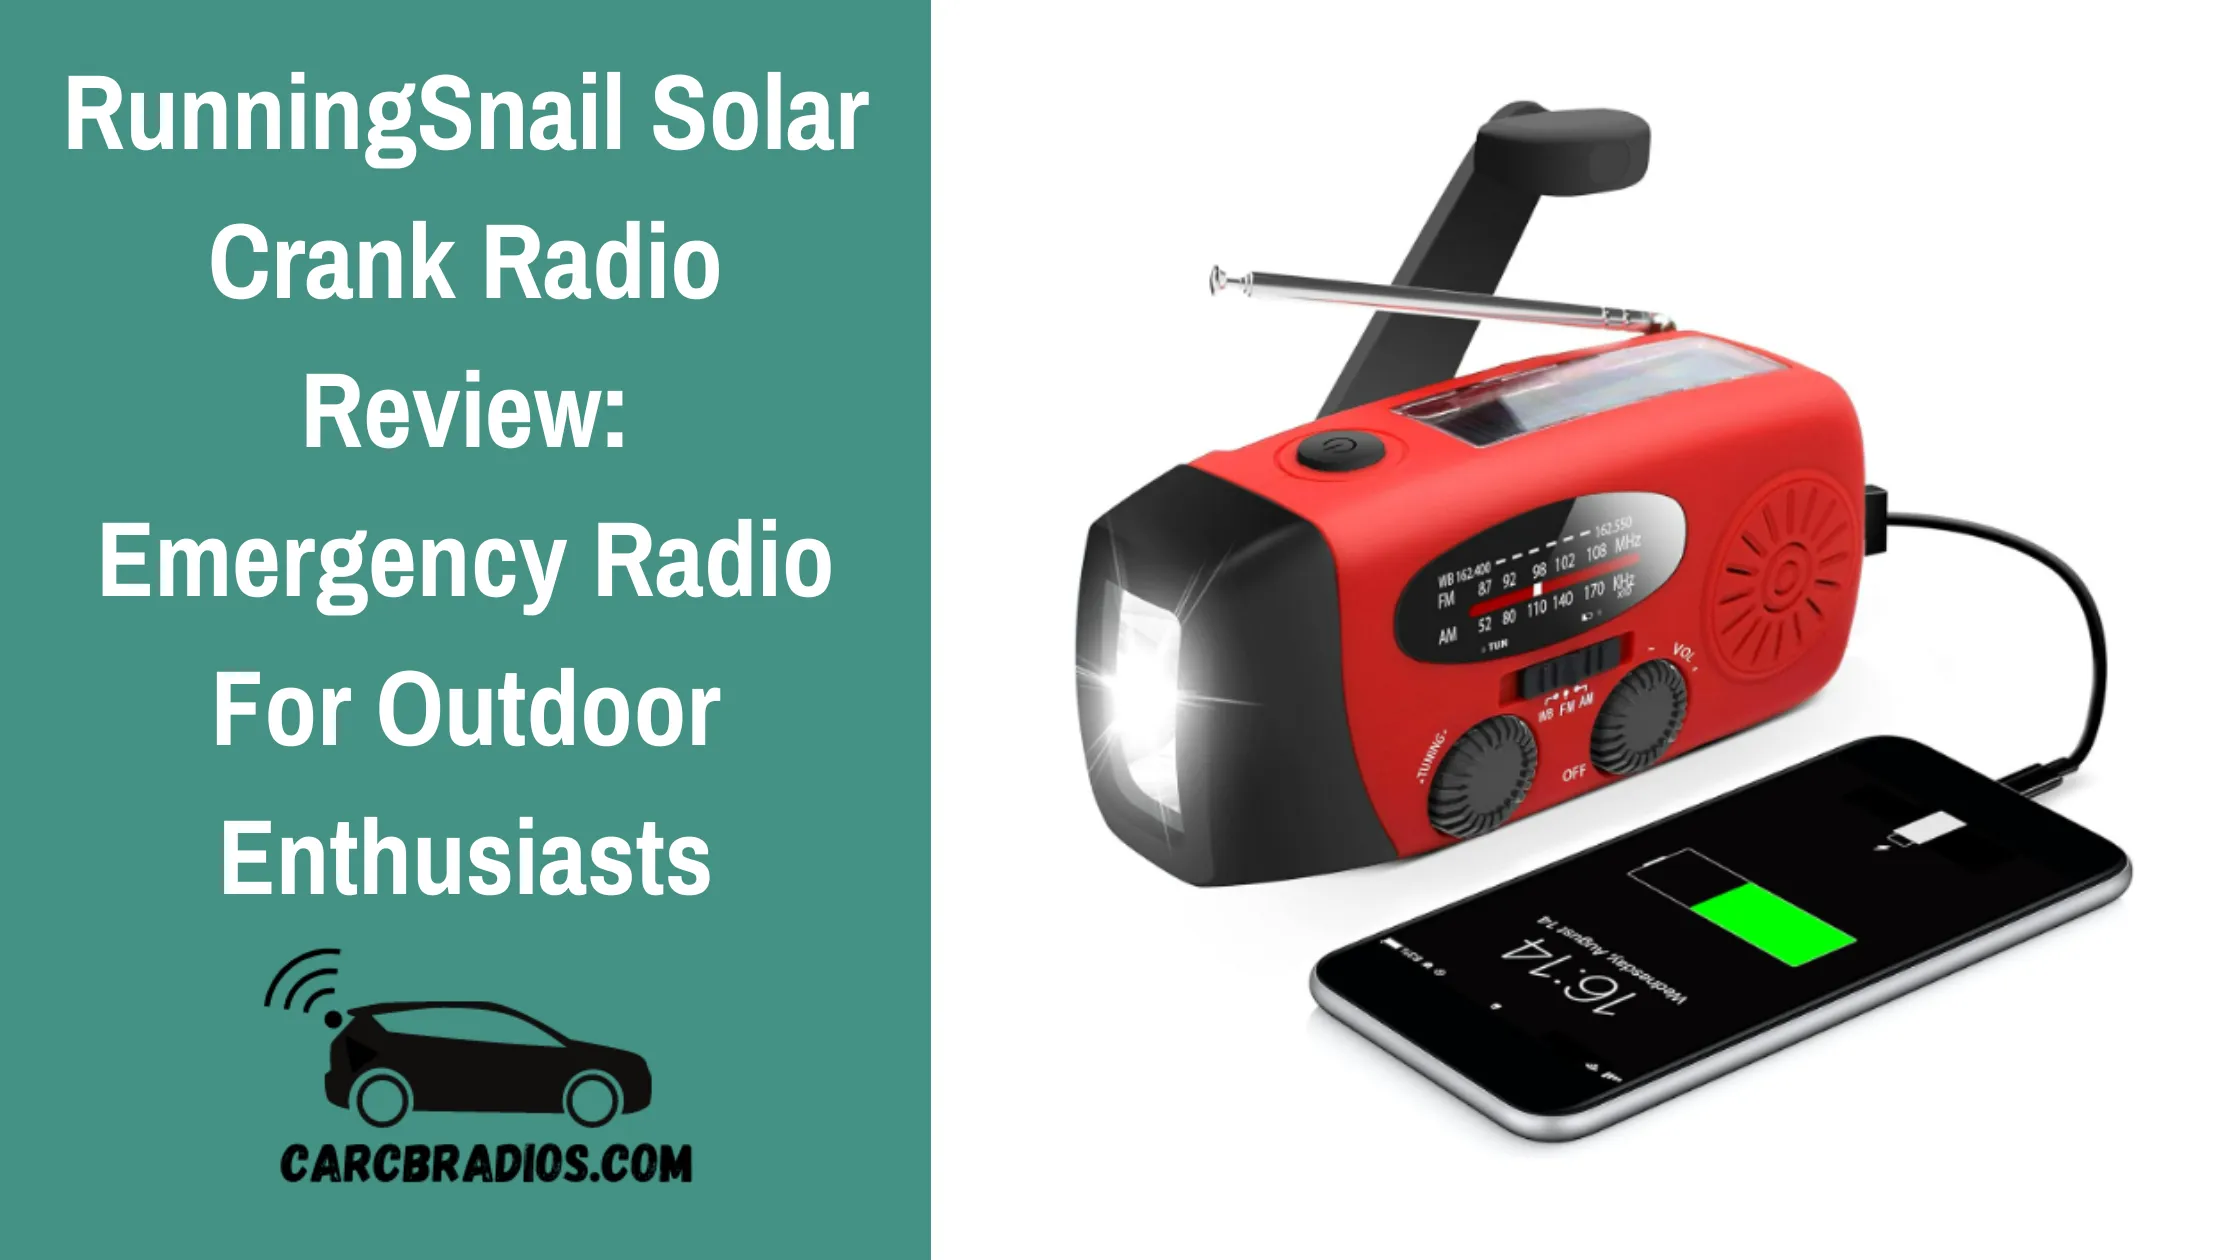 The RunningSnail Solar Crank Radio is a compact and lightweight device that measures 5.5 x 2.4 x 2.2 inches and weighs just 0.66 pounds. It features a rugged and durable design with a rubberized exterior that provides a secure grip and protects against drops and impacts. The radio offers a range of functions, including AM/FM radio, NOAA weather alerts, a 1W LED flashlight, and a 2000mAh power bank that can charge your phone or other USB devices.